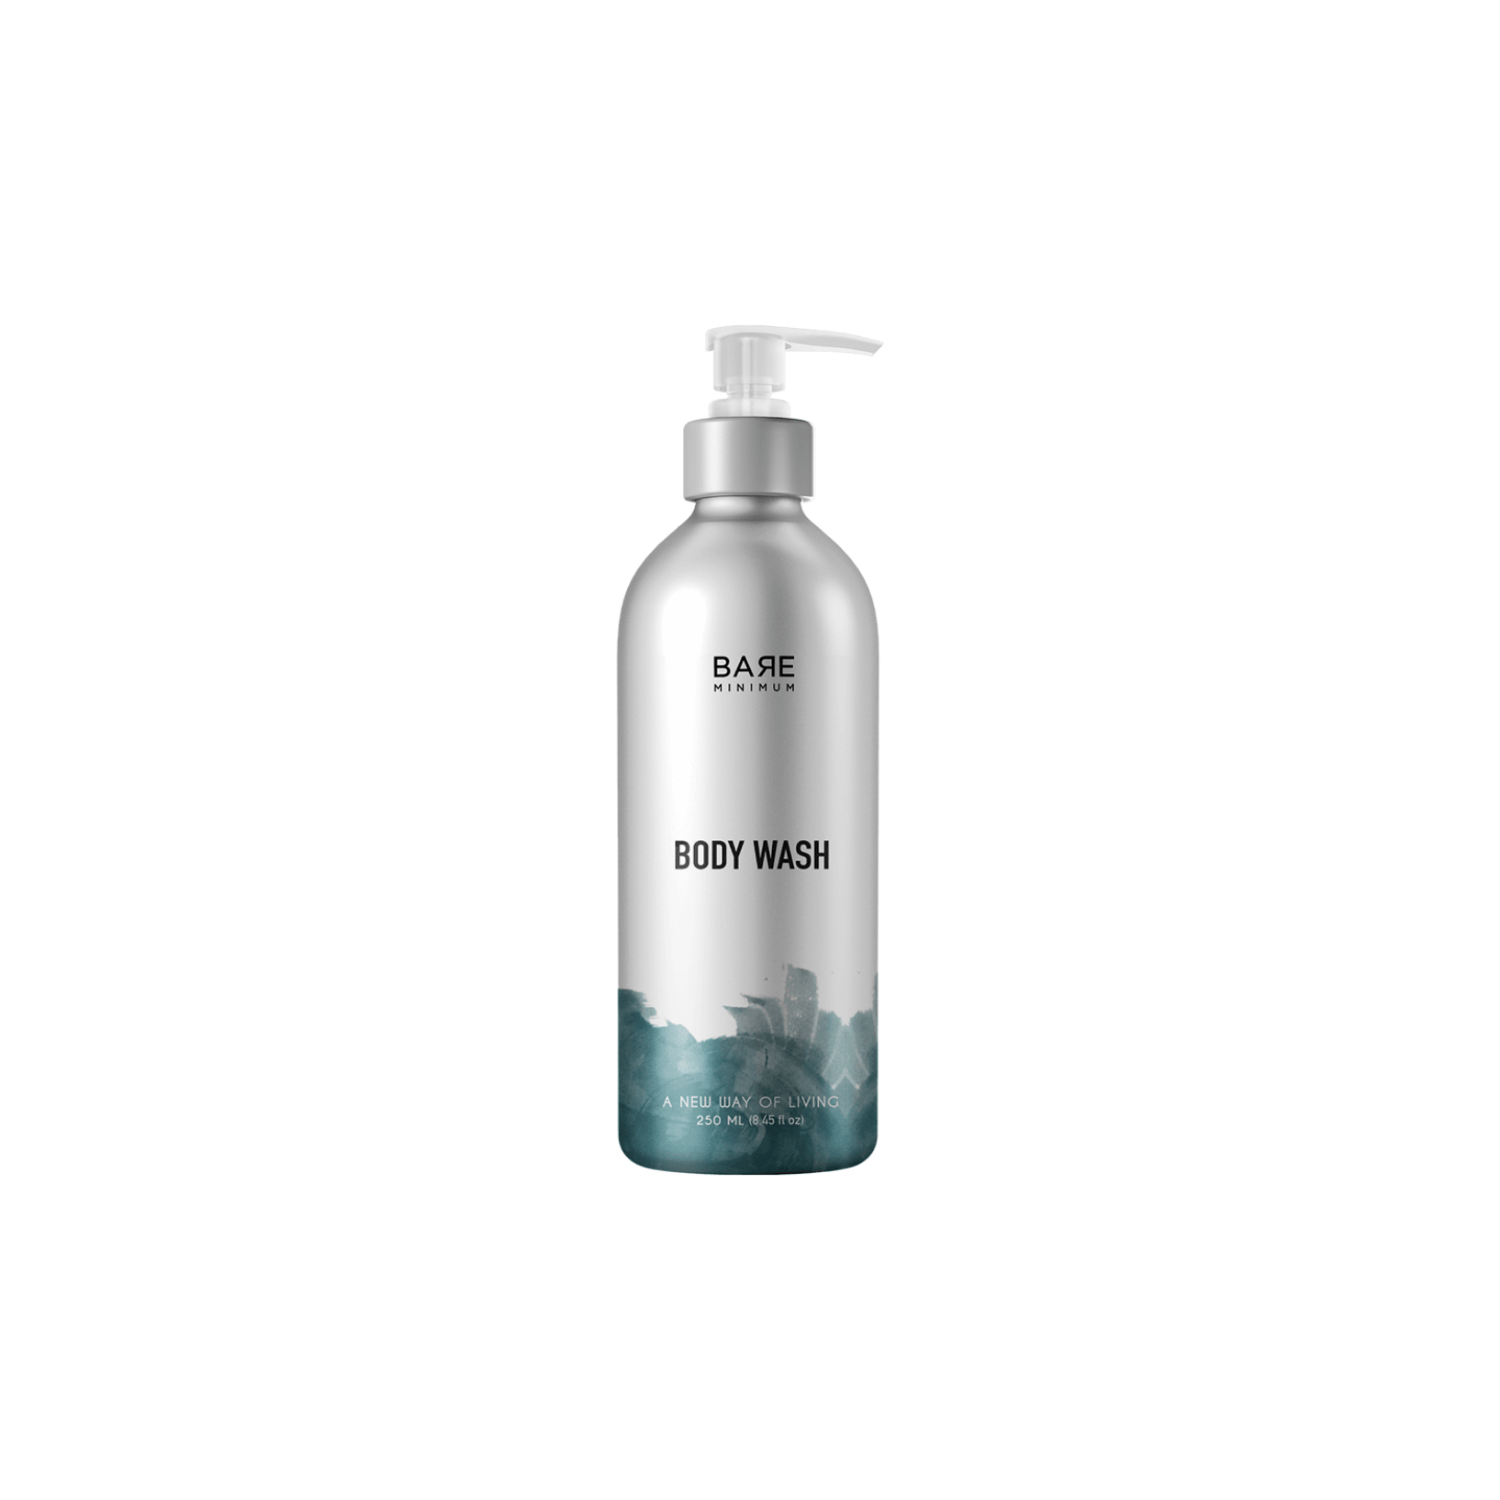 BARE MINIMUM | Bare Minimum body wash with all-natural ingredients, Soap-free, No parabens, For all skin types, 250 ML 5